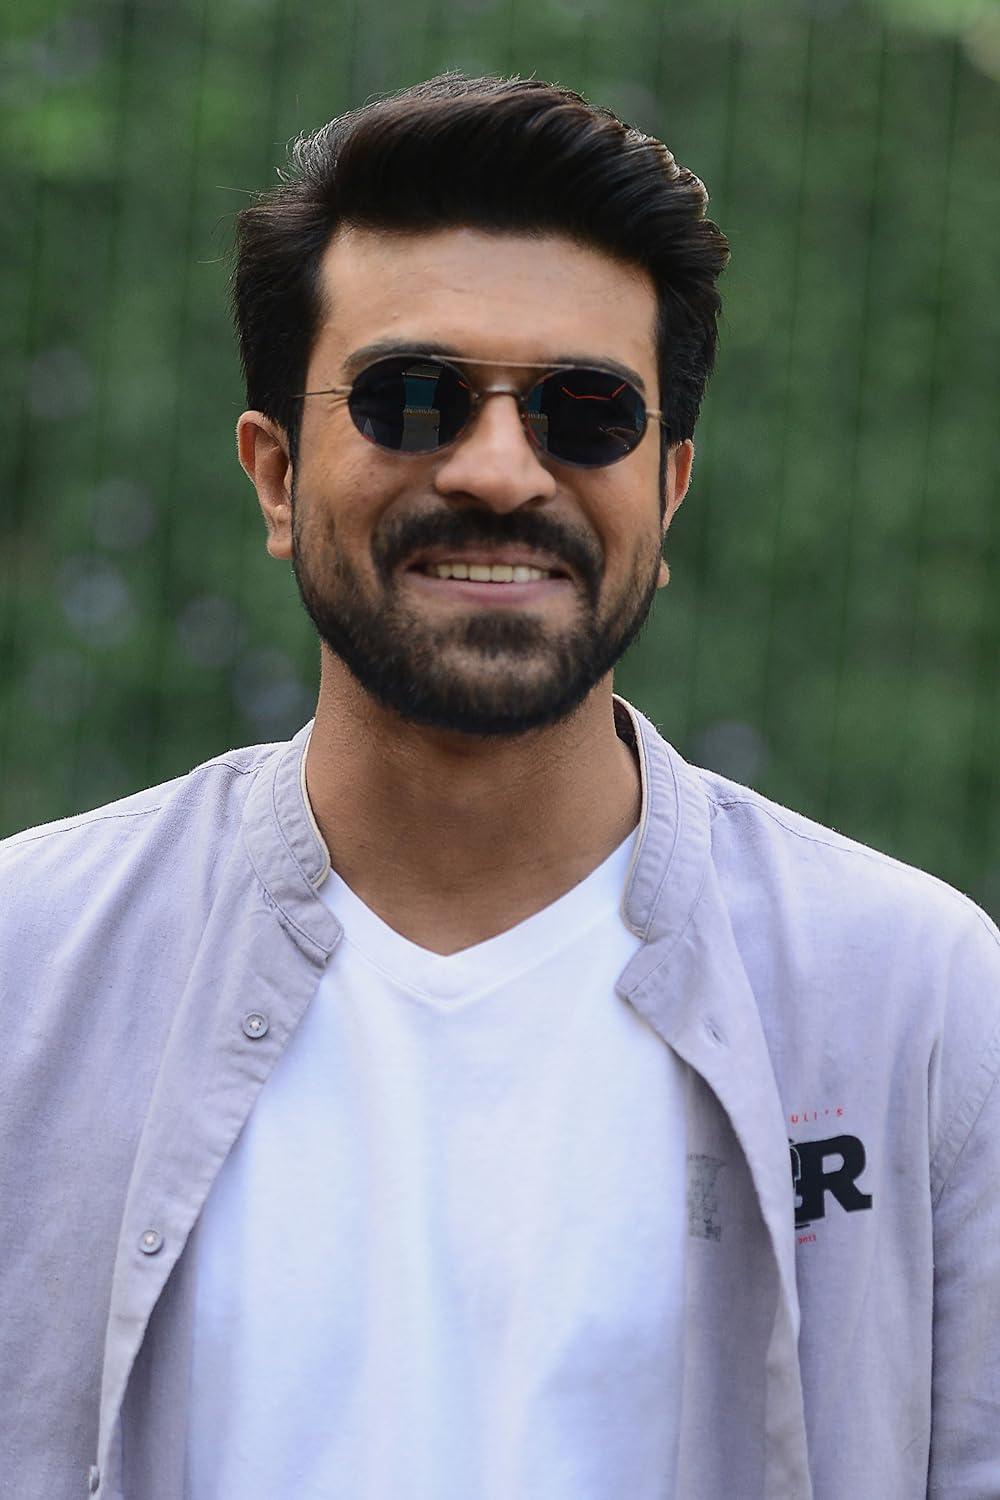 3rd GenerationRam Charan: Son of actor Chiranjeevi, Charan made his debut in the successful action film Chirutha (2007). He rose to prominence with SS Rajamouli’s fantasy action film Magadheera (2009), which held the record of being the highest-grossing Telugu film. His other commercially successful films include Racha (2012), Naayak (2013), Yevadu (2014), Dhruva (2016) and Rangasthalam (2018). One of the highest-paid actors in Telugu cinema, Ram Charan has been featured in Forbes India’s Celebrity 100 list since 2013. He is the cousin of Allu Arjun, Varun Tej, Sai Dharam Tej, Allu Sirish, Niharika Konidela, and Panja Vaisshnav Tej. Ram Charan tied the knot with Upasana Kamineni. They welcomed a daughter, whom they named  Klin Kaara Konidela.